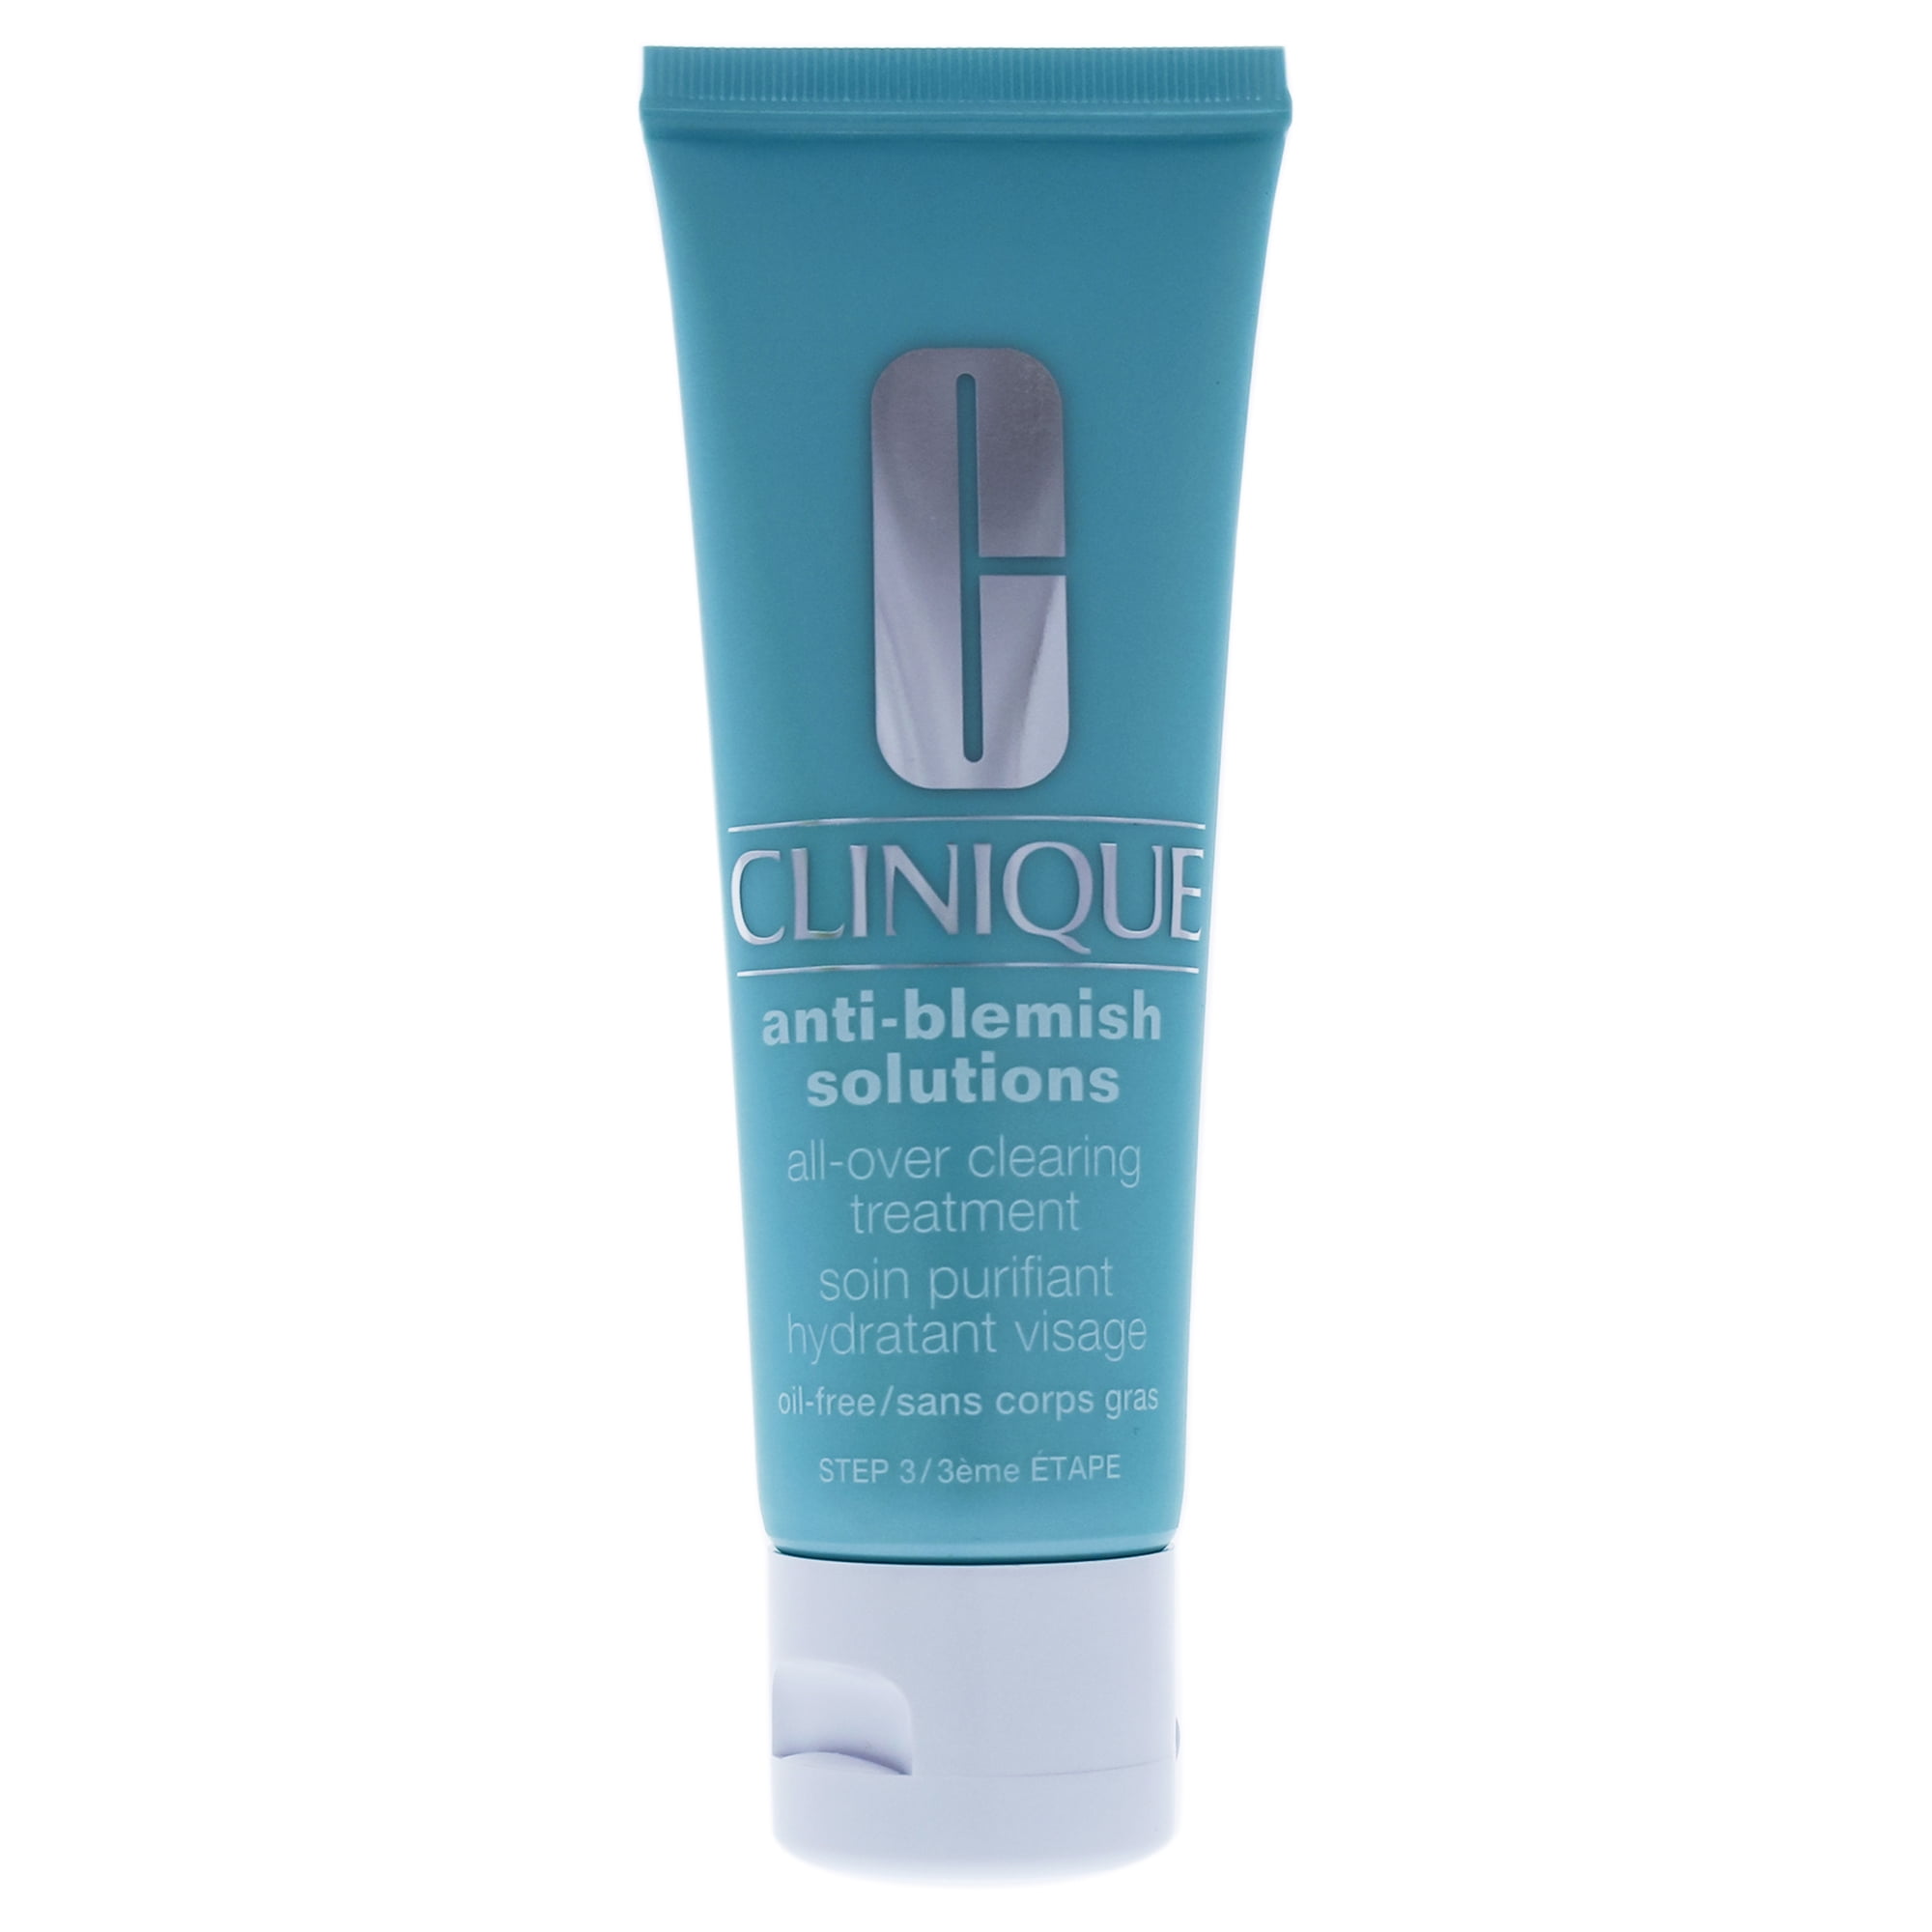 Clinique Acne Solutions All-Over Clearing Oz 1.7 Treatment, Fl